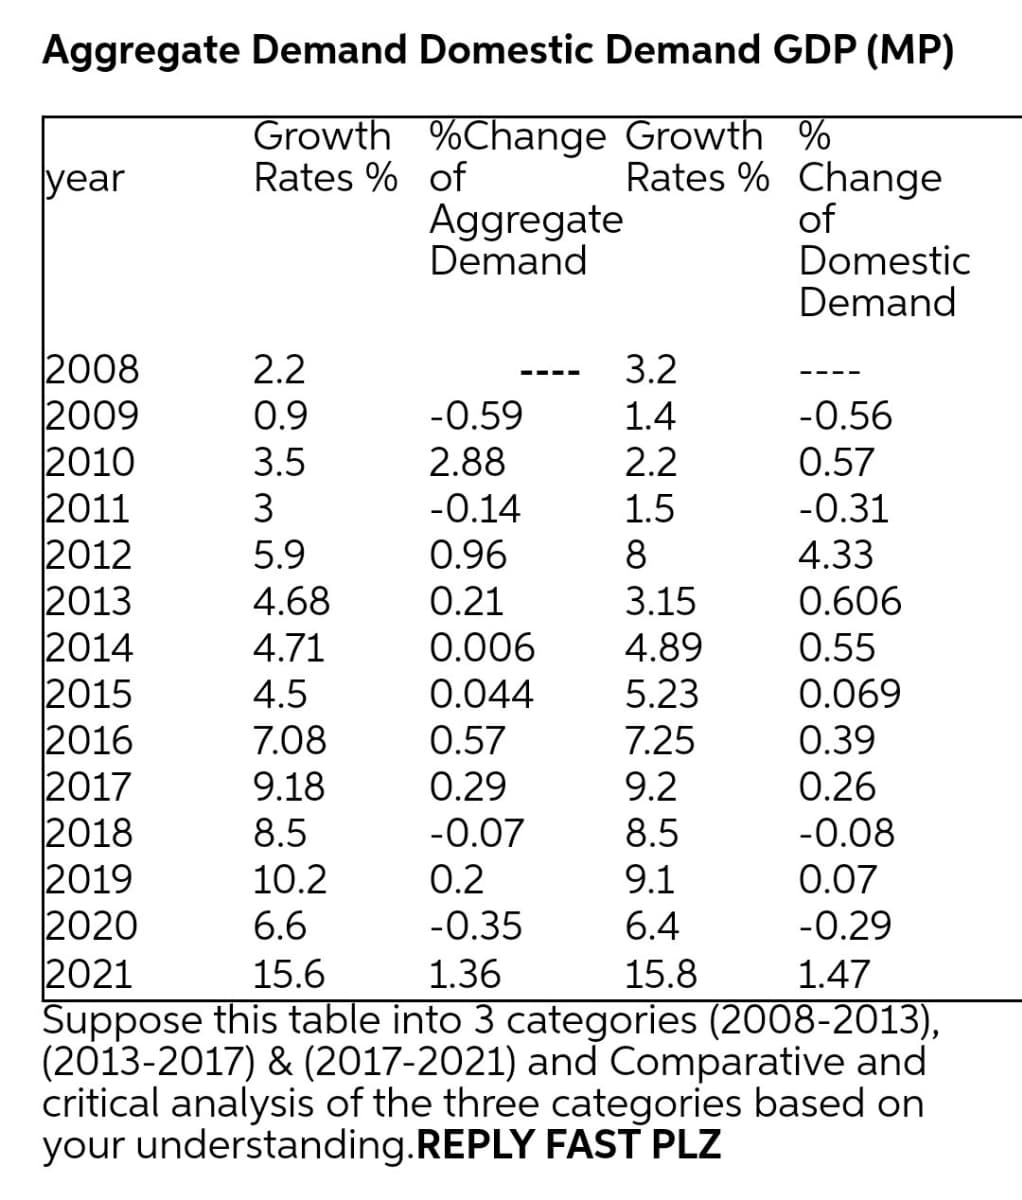 Aggregate Demand Domestic Demand GDP (MP)
Growth %Change Growth %
Rates % of
Rates % Change
of
Domestic
Demand
year
Aggregate
Demand
2008
2009
2010
2011
2012
2013
2014
2015
2016
2017
2018
2019
2020
2021
Suppose this table into 3 categories (2008-2013),
(2013-2017) & (2017-2021) and Comparative and
critical analysis of the three categories based on
your understanding.REPLY FAST PLZ
2.2
3.2
0.9
-0.59
1.4
-0.56
3.5
2.88
2.2
0.57
-0.31
3
-0.14
1.5
5.9
0.96
8
4.33
4.68
0.21
3.15
0.606
0.006
0.044
4.71
4.89
0.55
4.5
5.23
0.069
7.08
0.57
7.25
0.39
9.18
0.29
9.2
0.26
8.5
-0.07
8.5
-0.08
10.2
0.2
9.1
0.07
6.6
-0.35
6.4
-0.29
15.6
1.36
15.8
1.47
